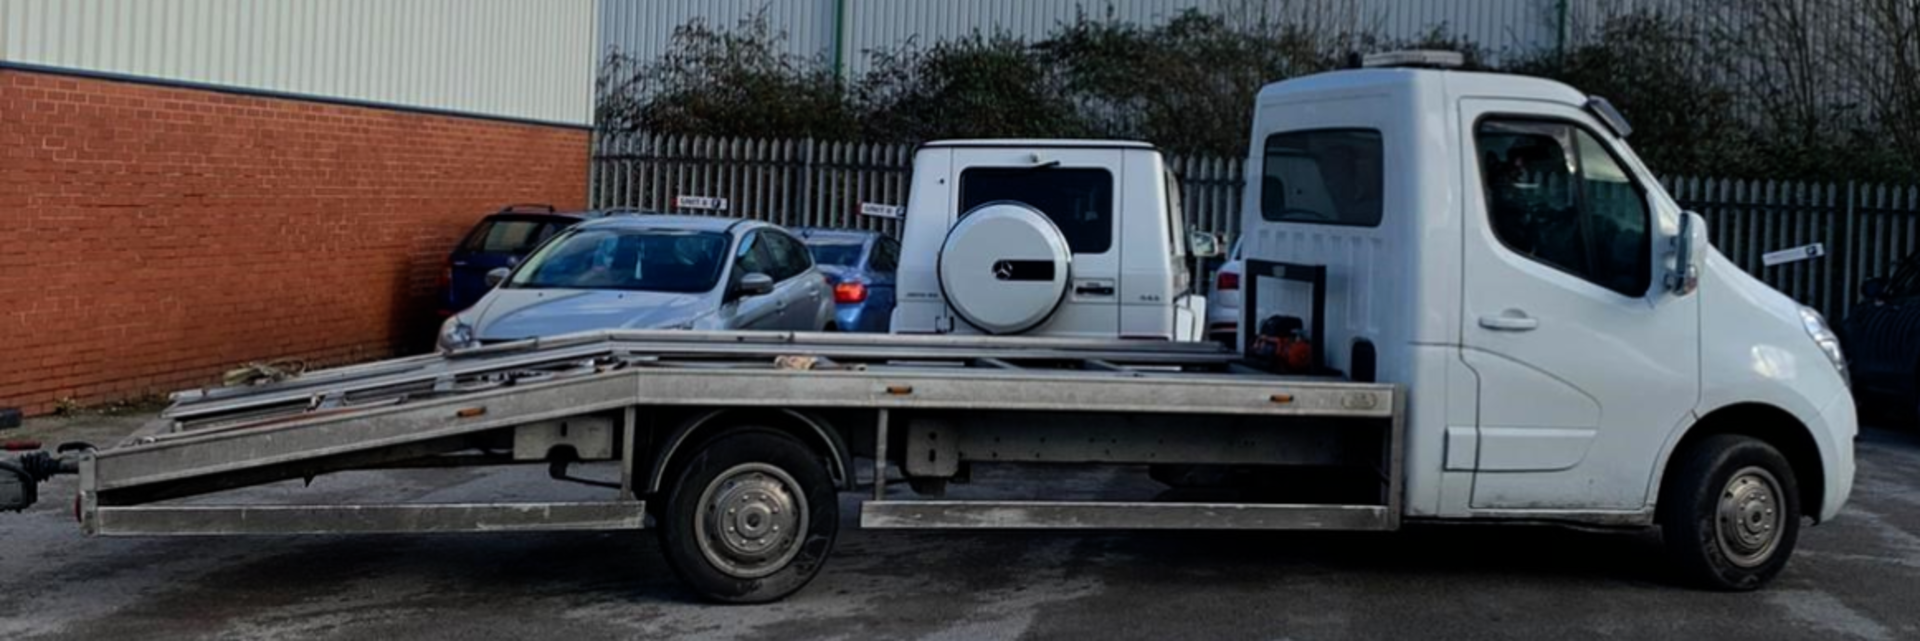 2012 VAUXHALL MOVANO RECOVERY PLUS VAT - Image 10 of 10